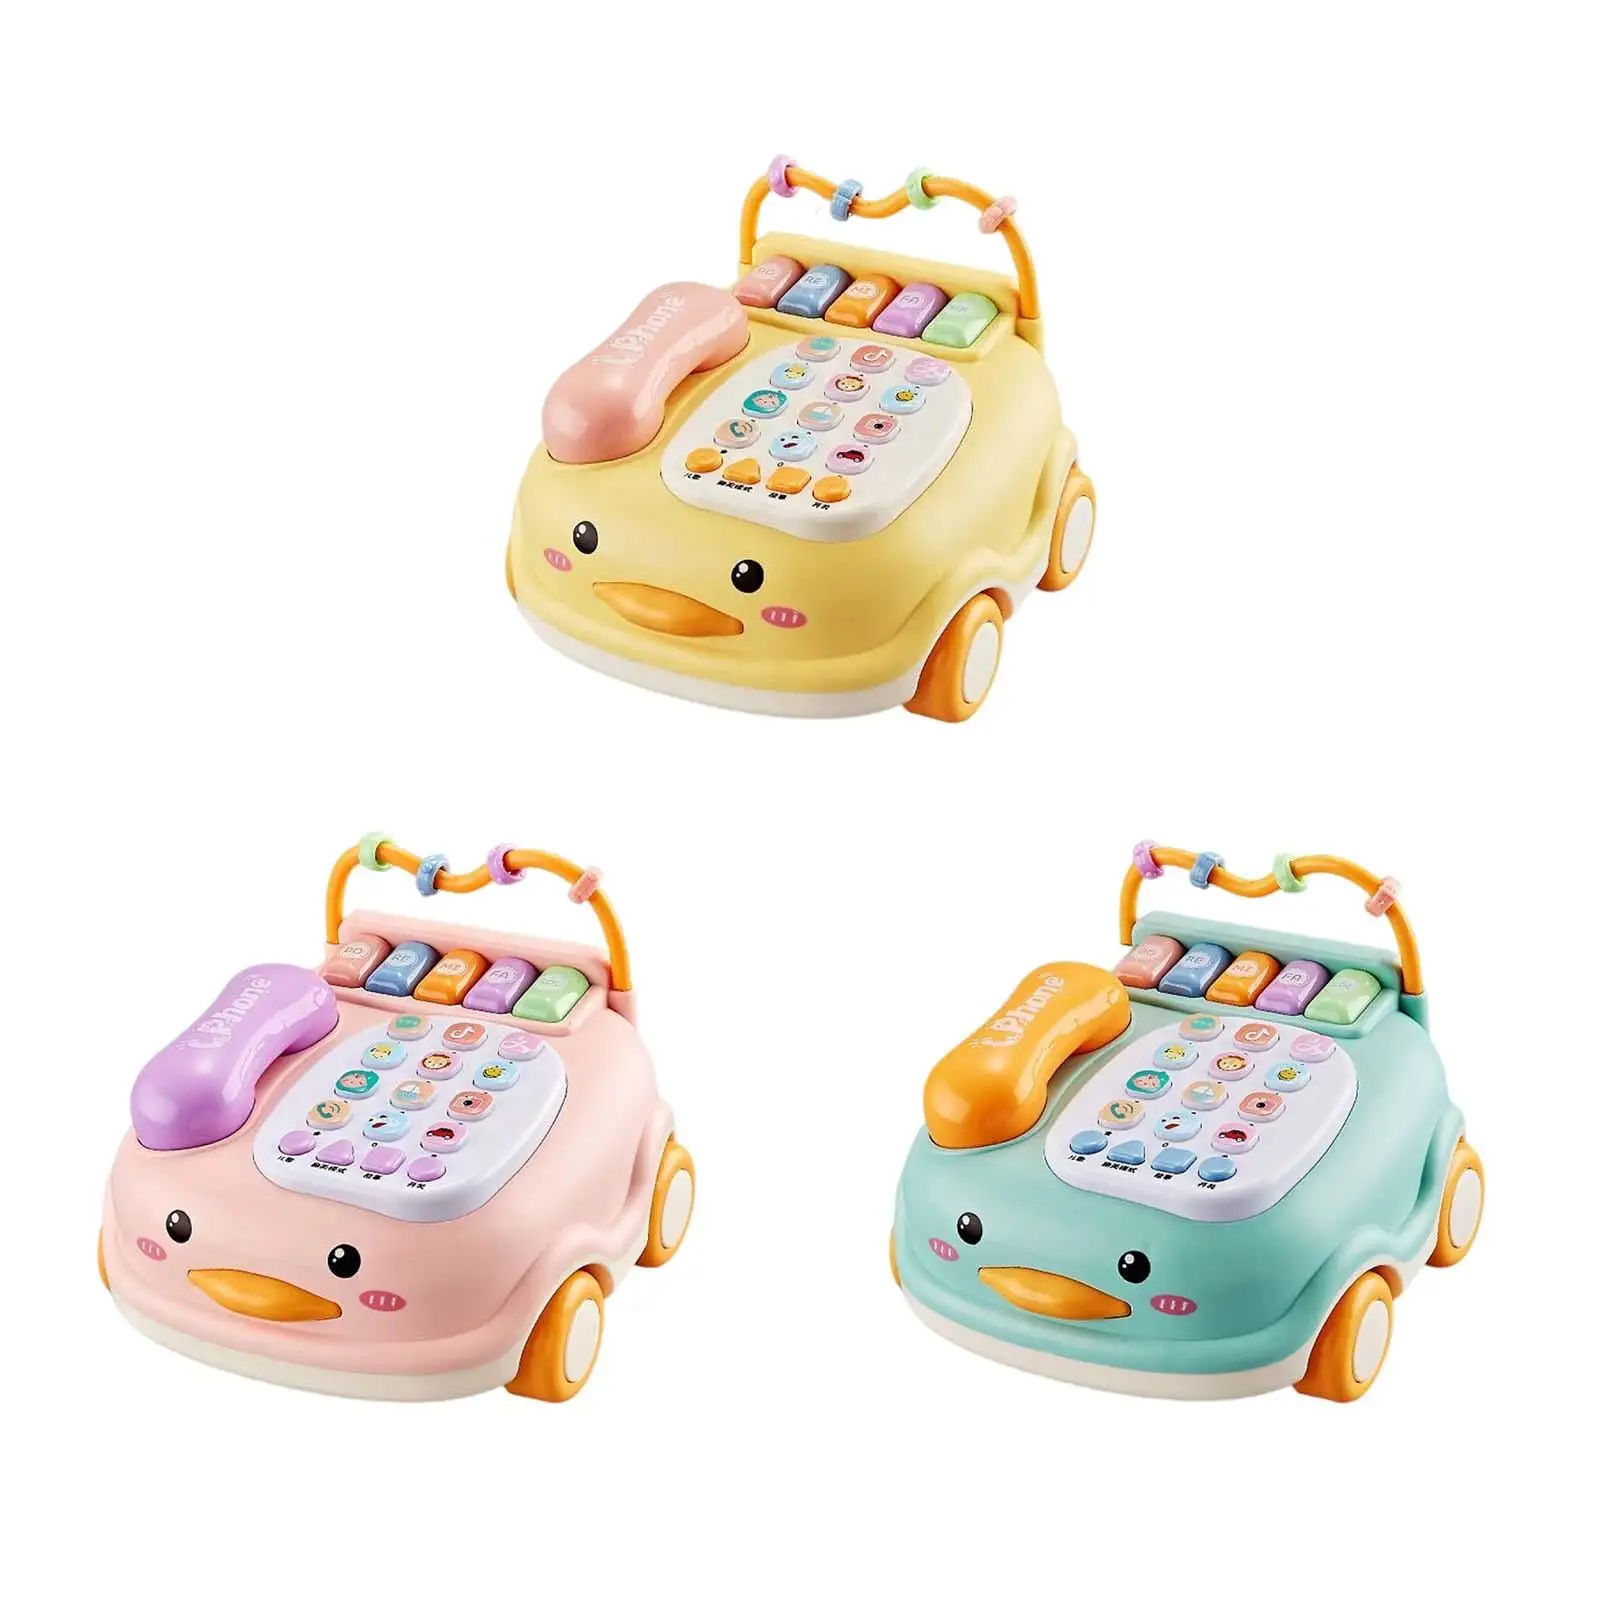 Baby Musical toy Lights Baby Phone Toy Montessori Toy for Early Education Gift Children Boy Preschool Educational Learning